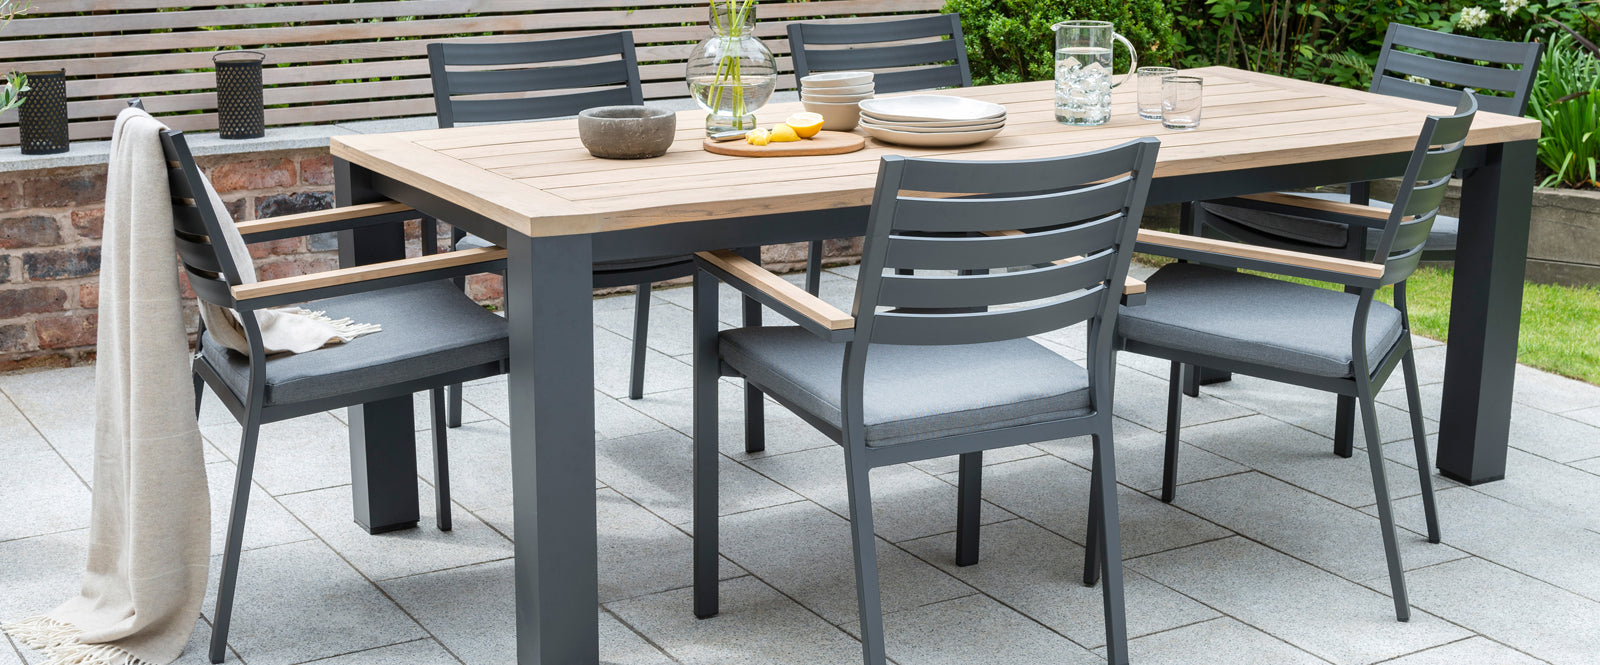 Elba Dining Collection with aluminum frame and teak table top and accents